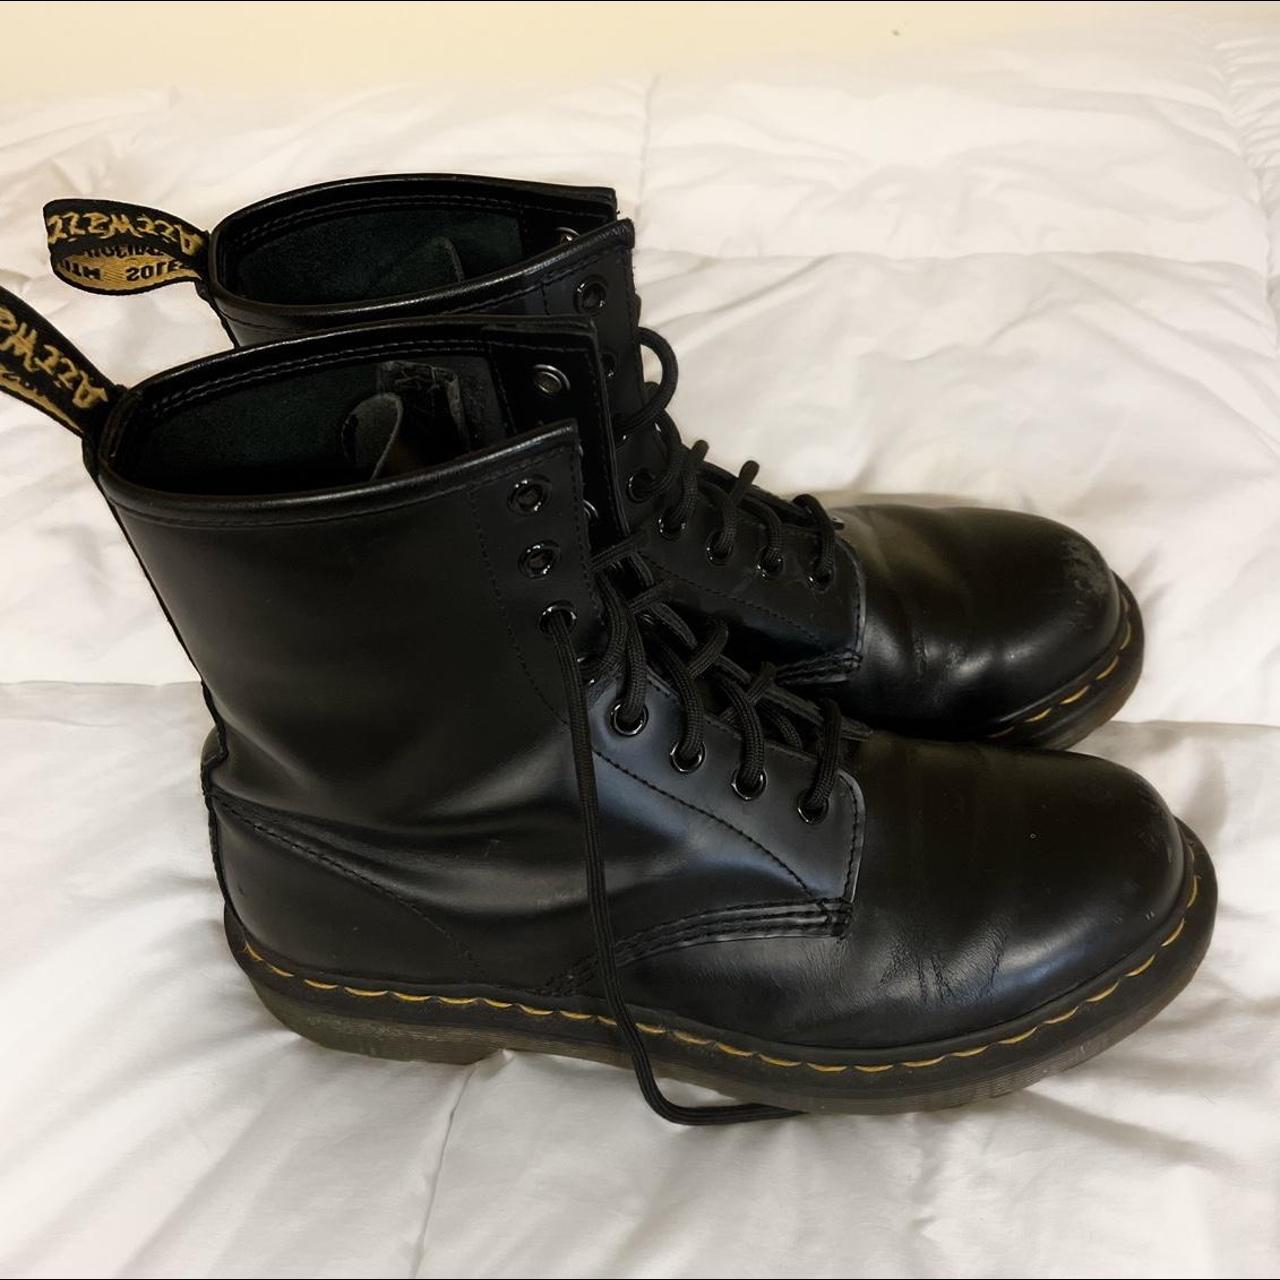 Beautiful classic Dr. Martens boots - black leather ... - Depop